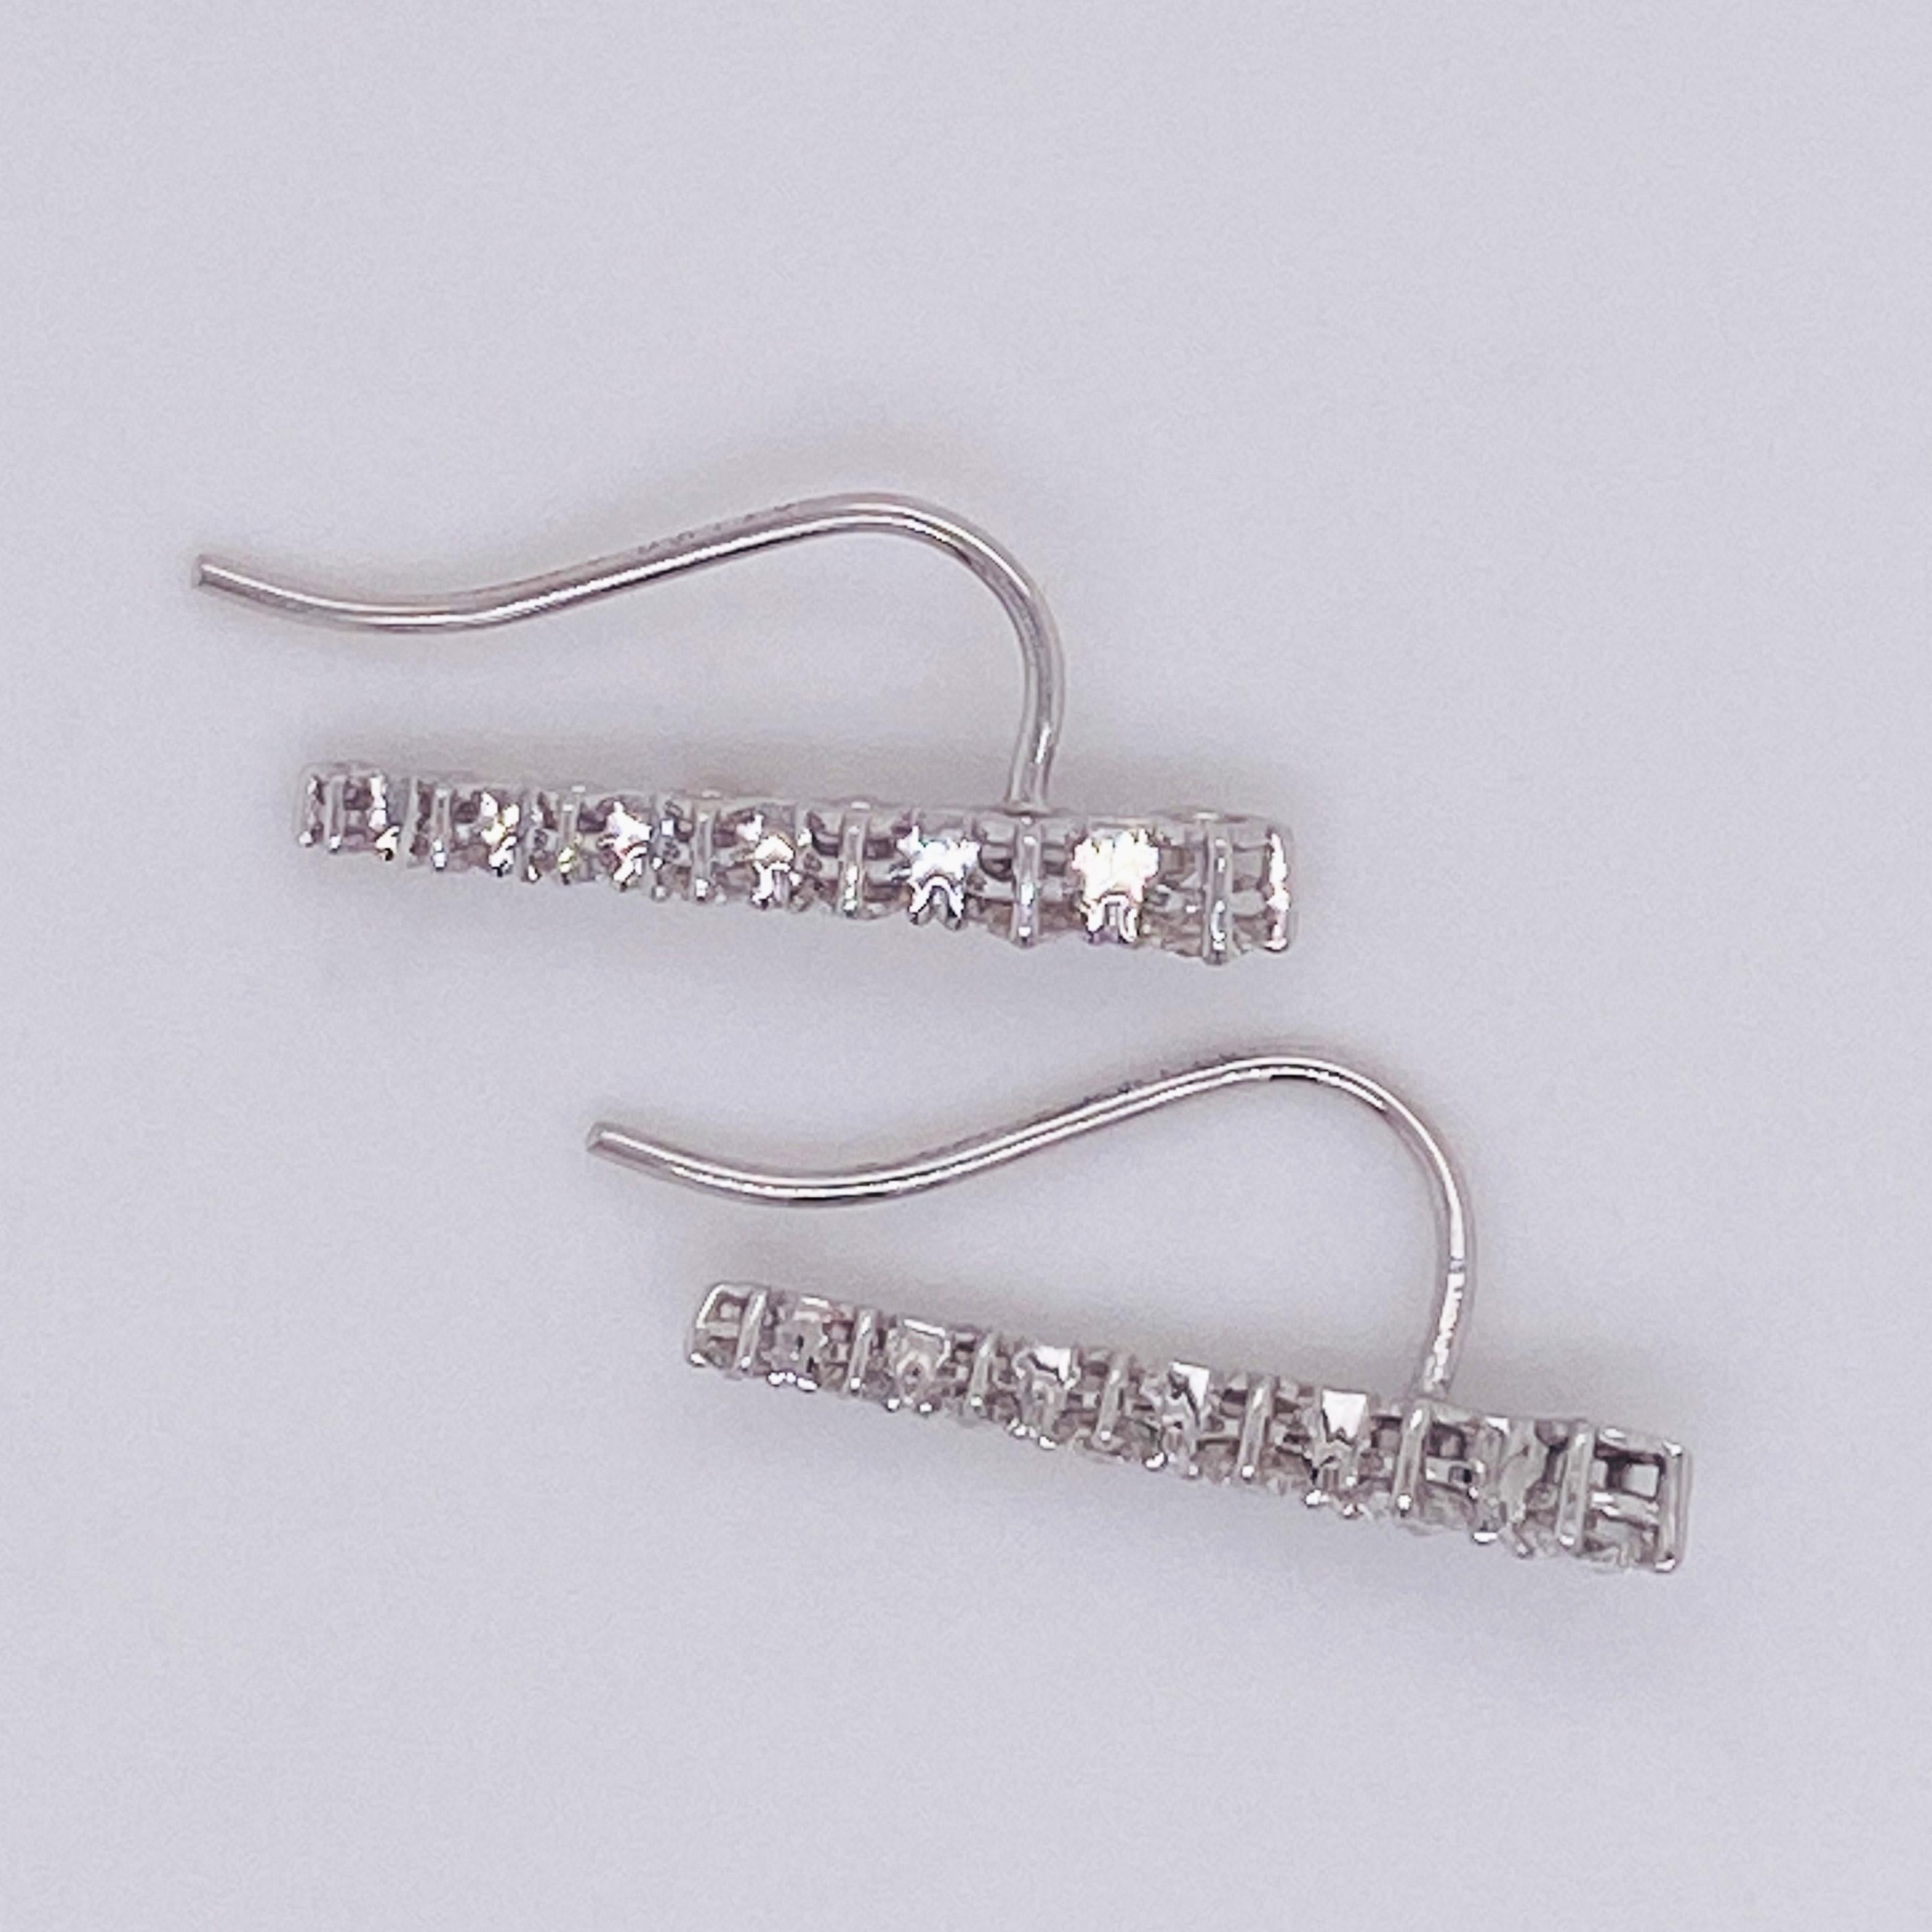 Graduated Ear Climbers 14K White Gold 0.50 Carat Diamonds Half-Carat EG13180W In New Condition For Sale In Austin, TX